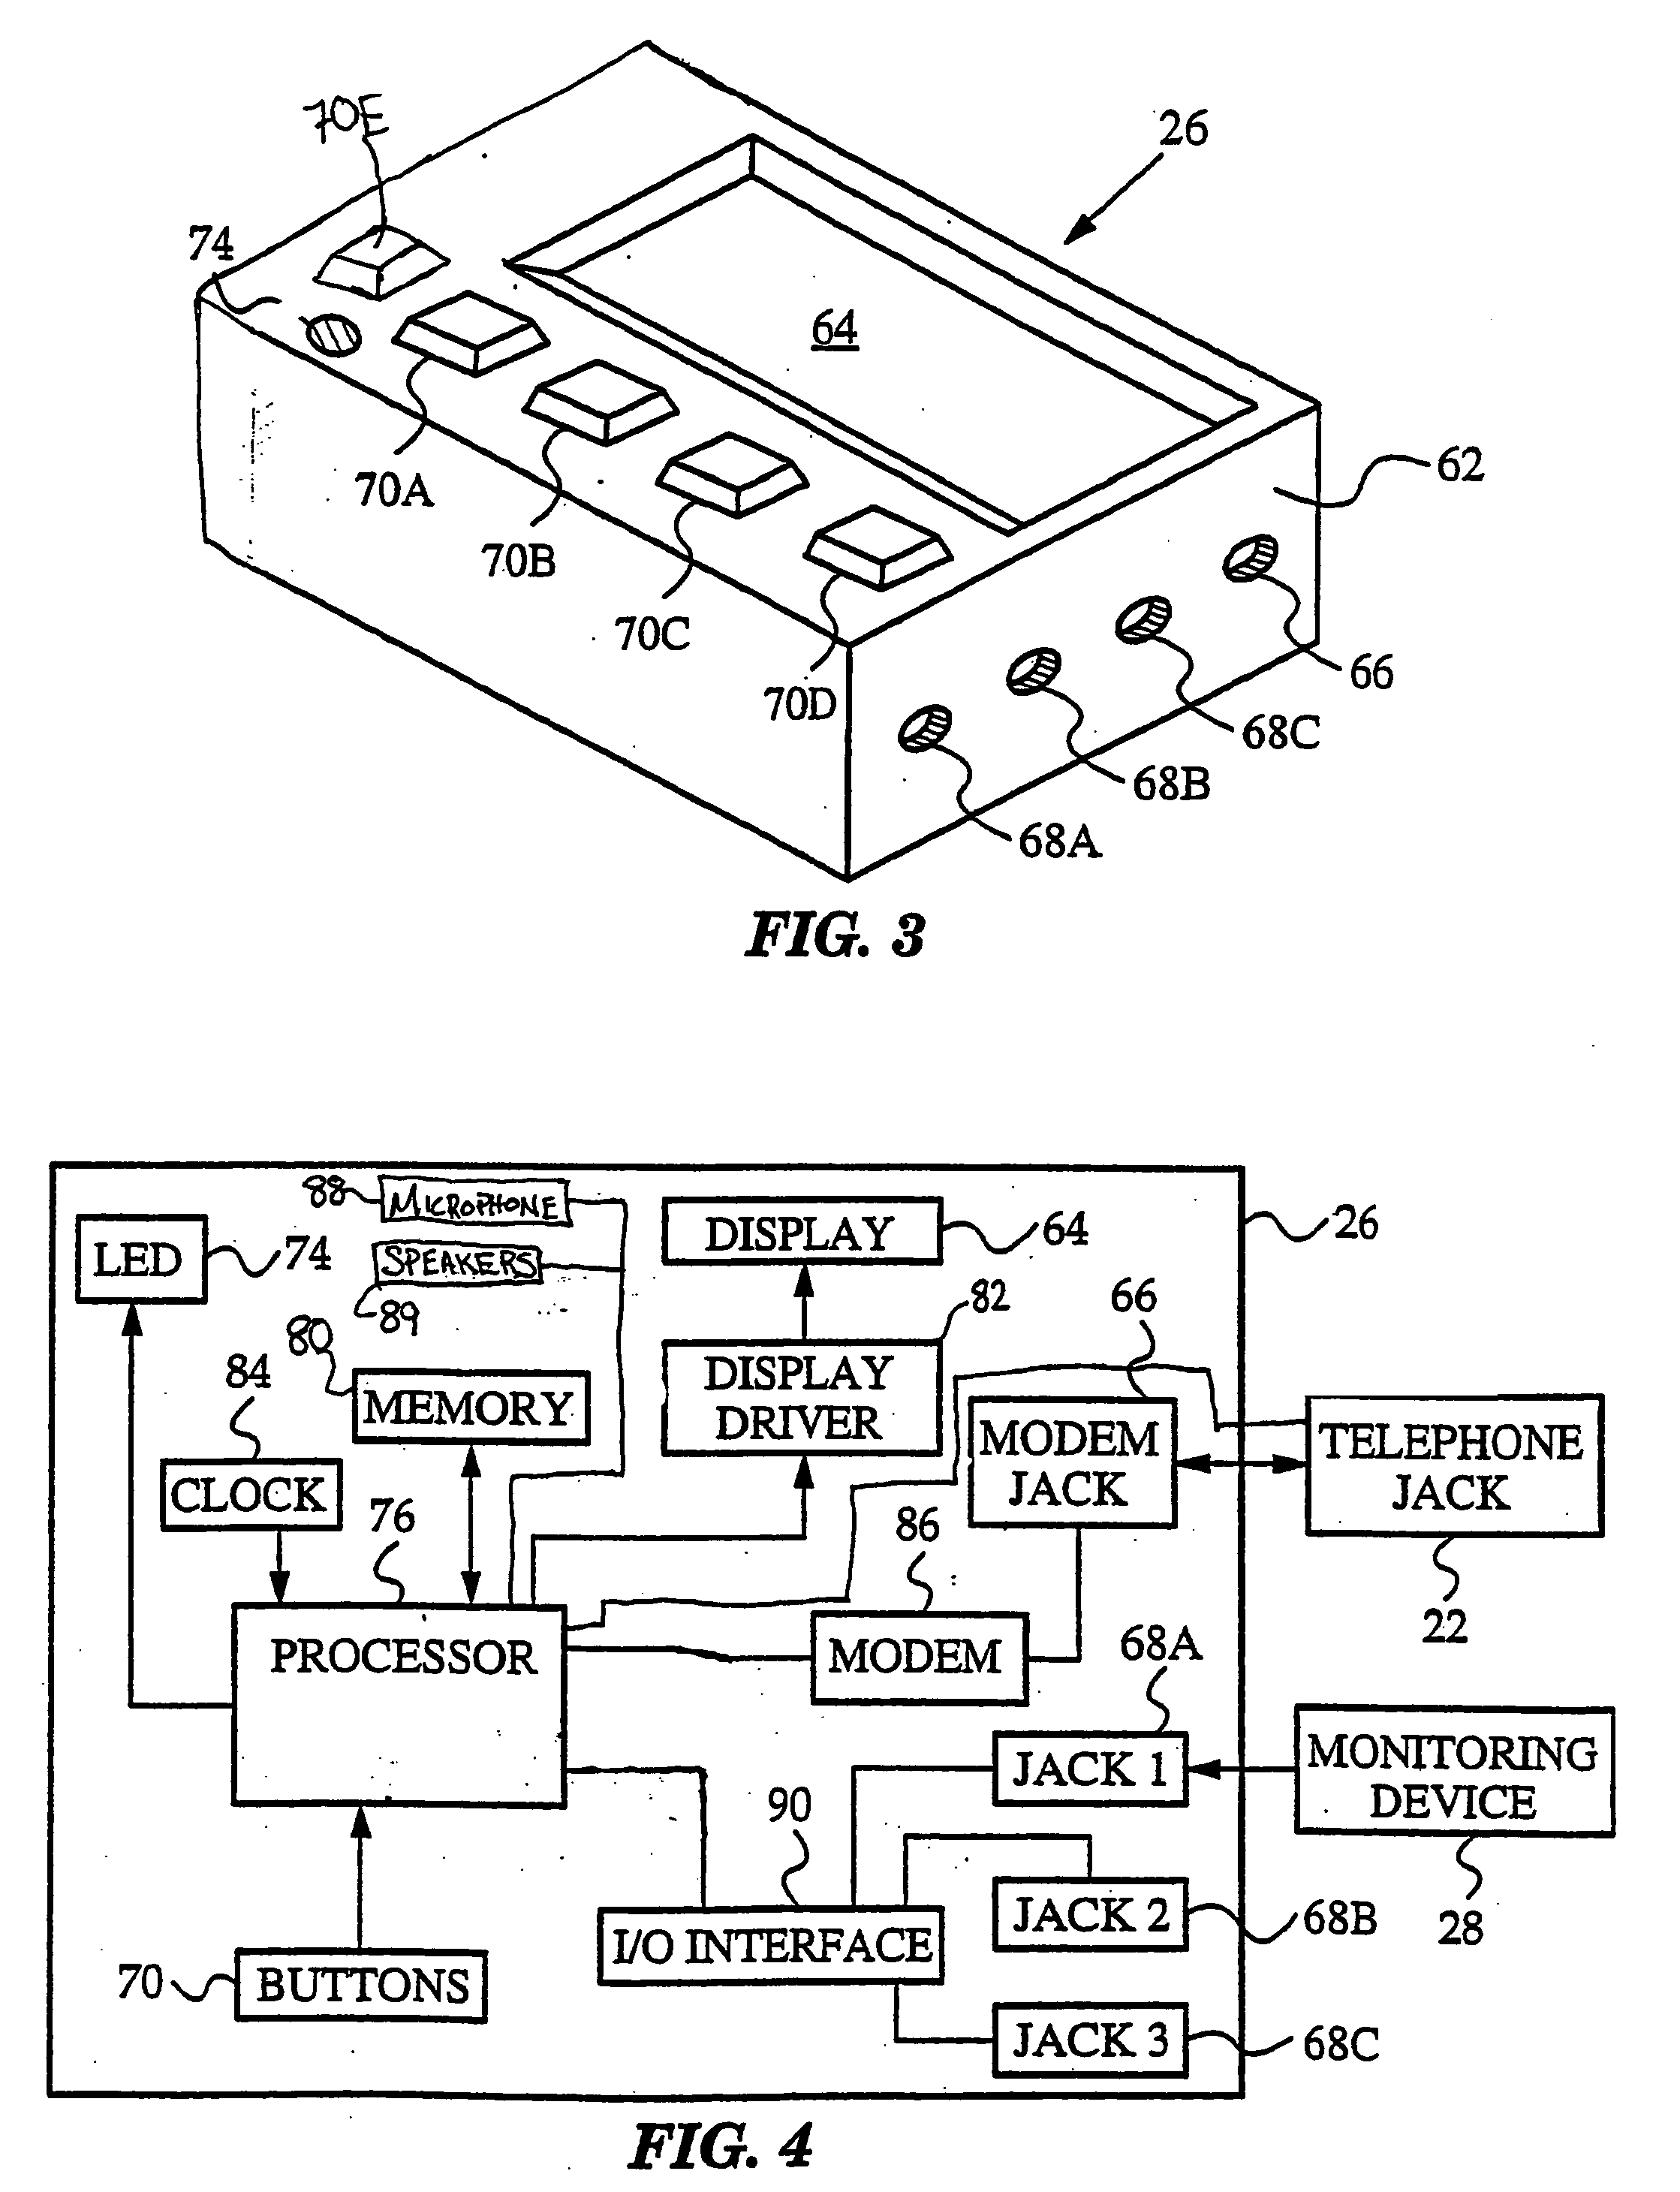 Remotely monitoring an individual using scripted communications